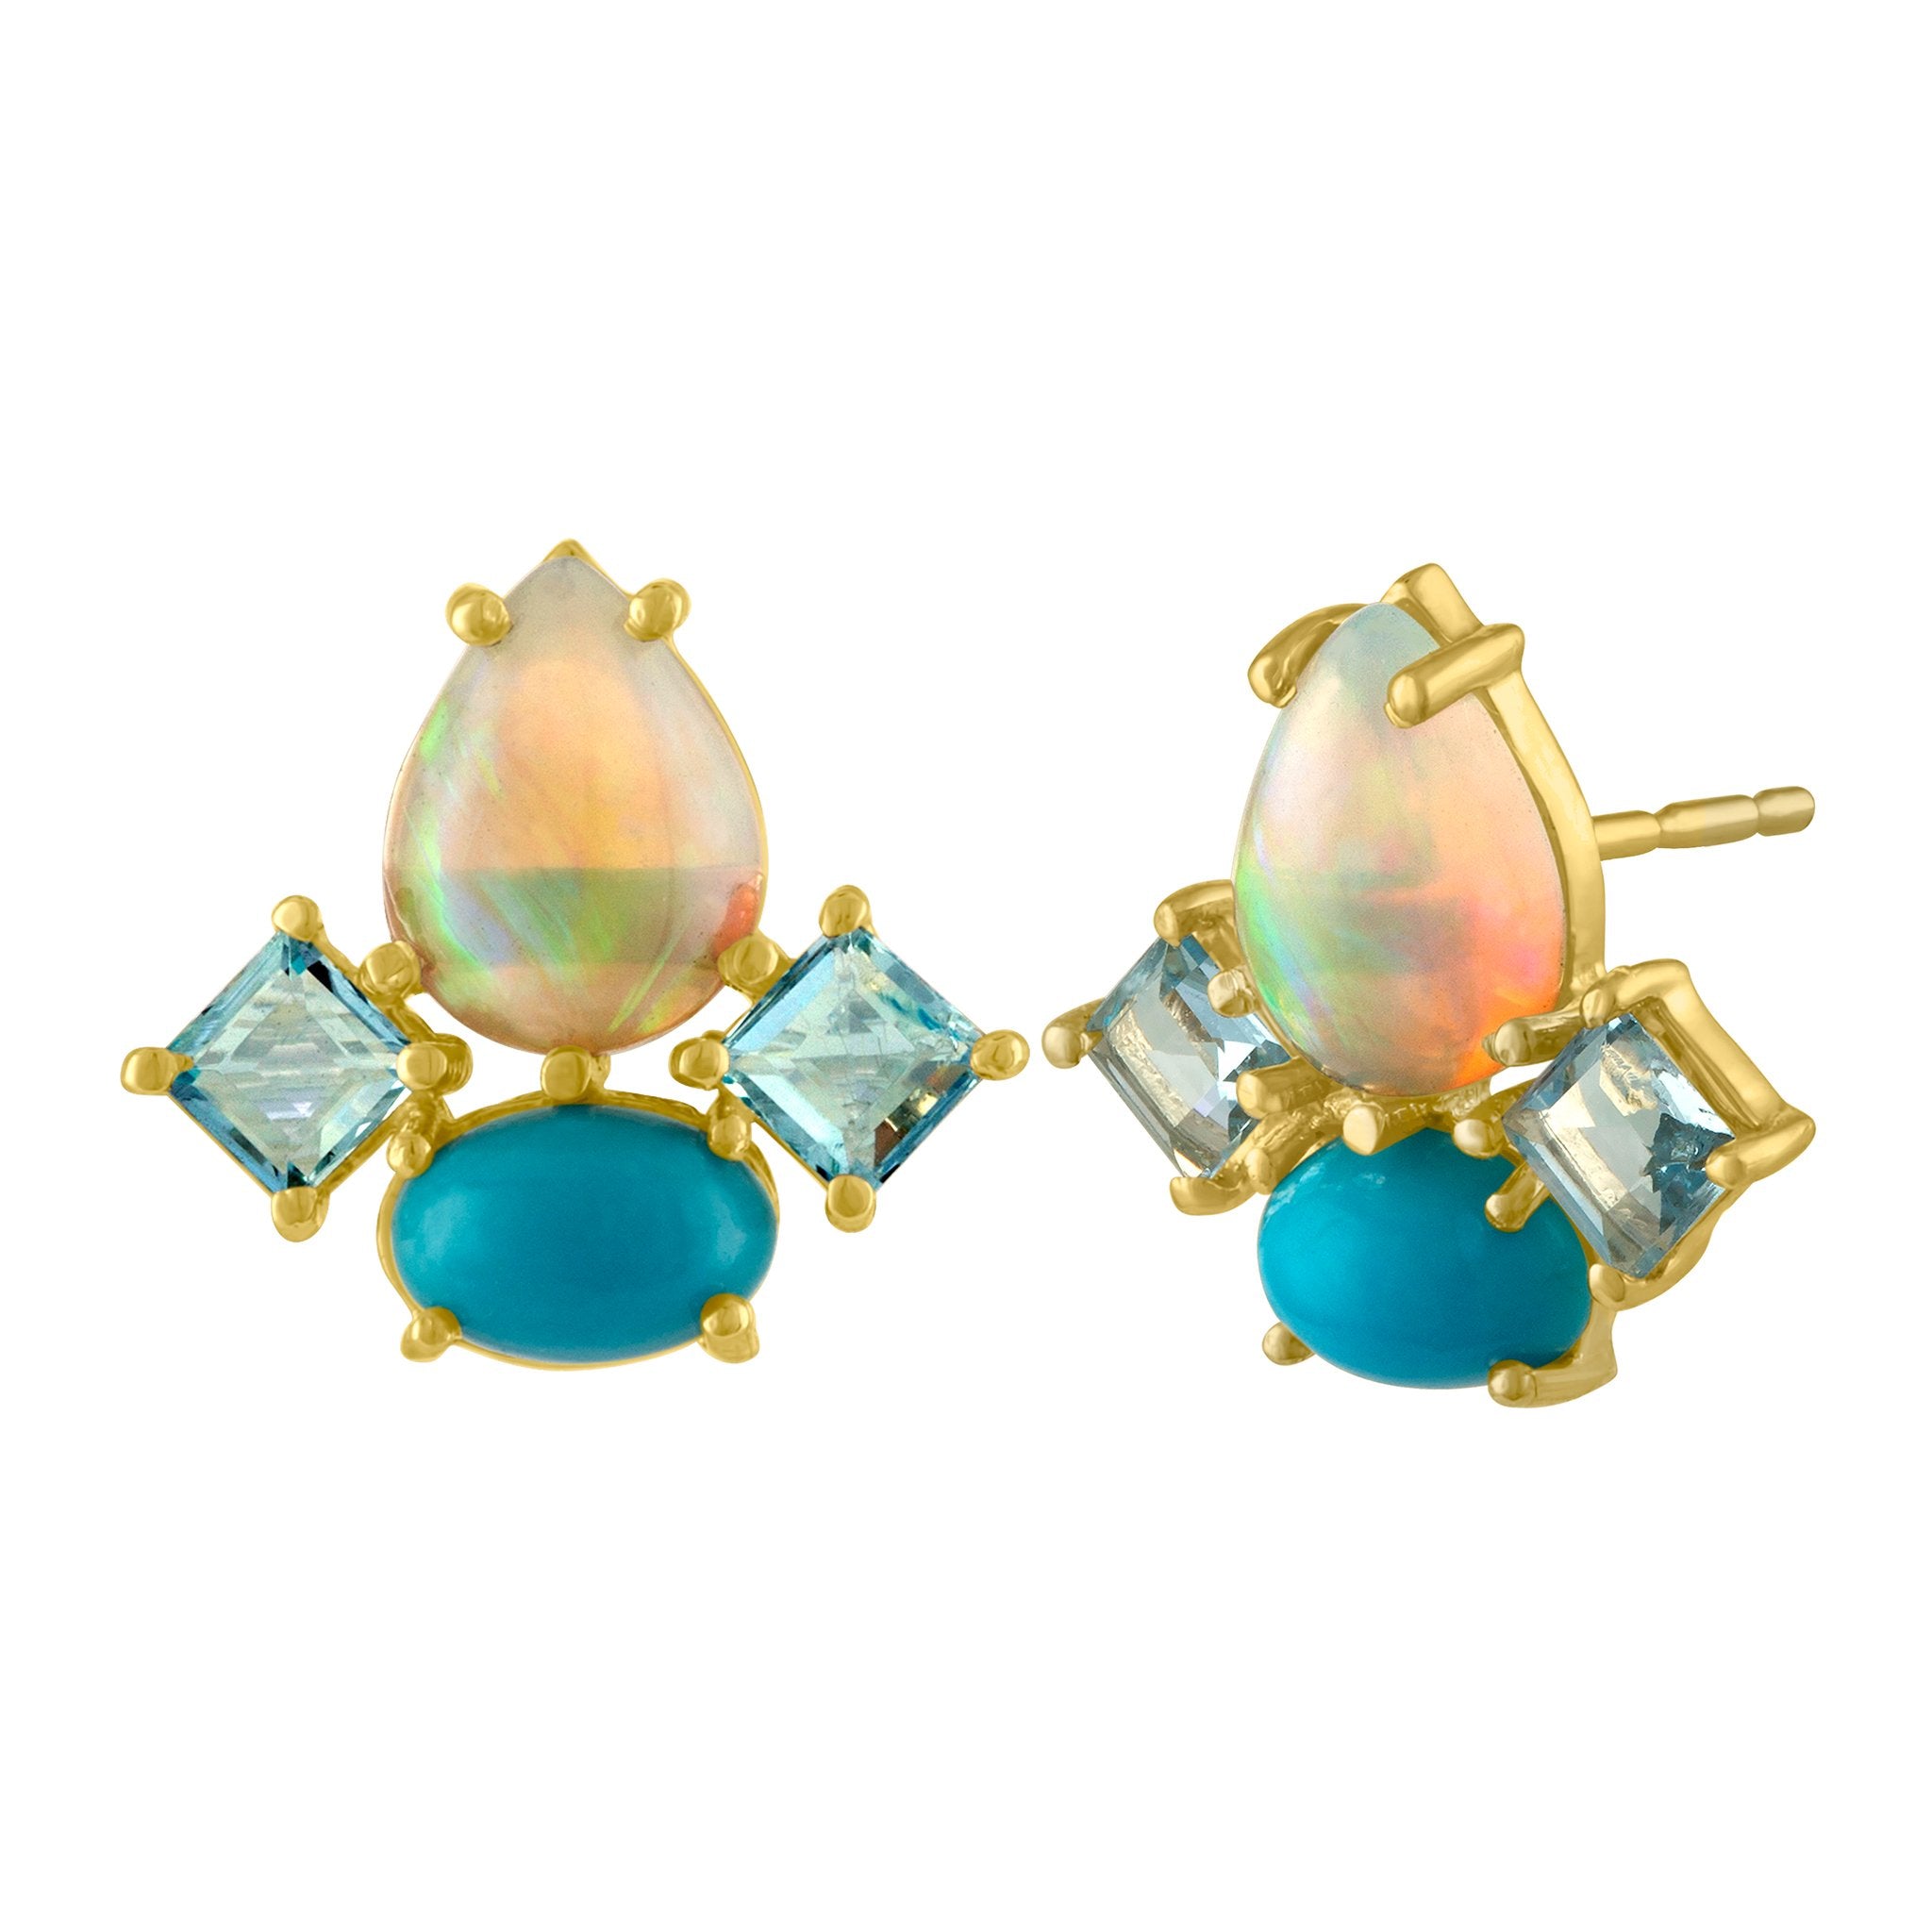 Dolce Stud Earrings: 14k Gold, Opal, Turquoise, Acquamarine